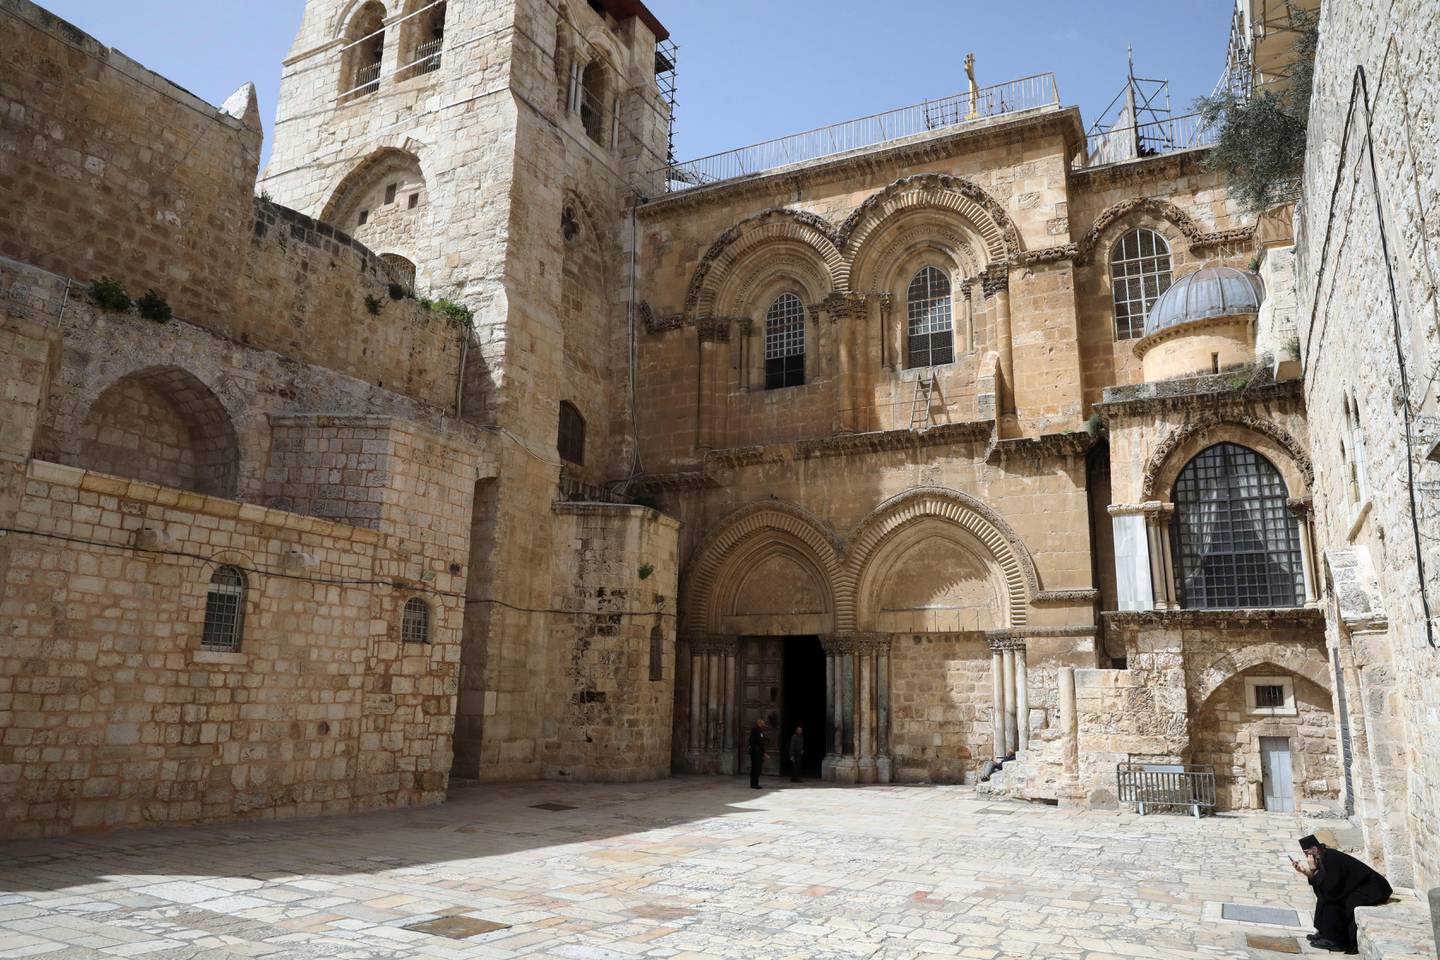 An Orthodox Christian priest checks his phone at an empty plaza in front to the Church of the Holy Sepluchre, where Christians believe Jesus Christ was buried, in Jerusalem, Monday, March 23, 2020. In Israel daily life has largely shut down with coronavirus cases multiplying greatly over the past week, (AP Photo/Mahmoud Illean)